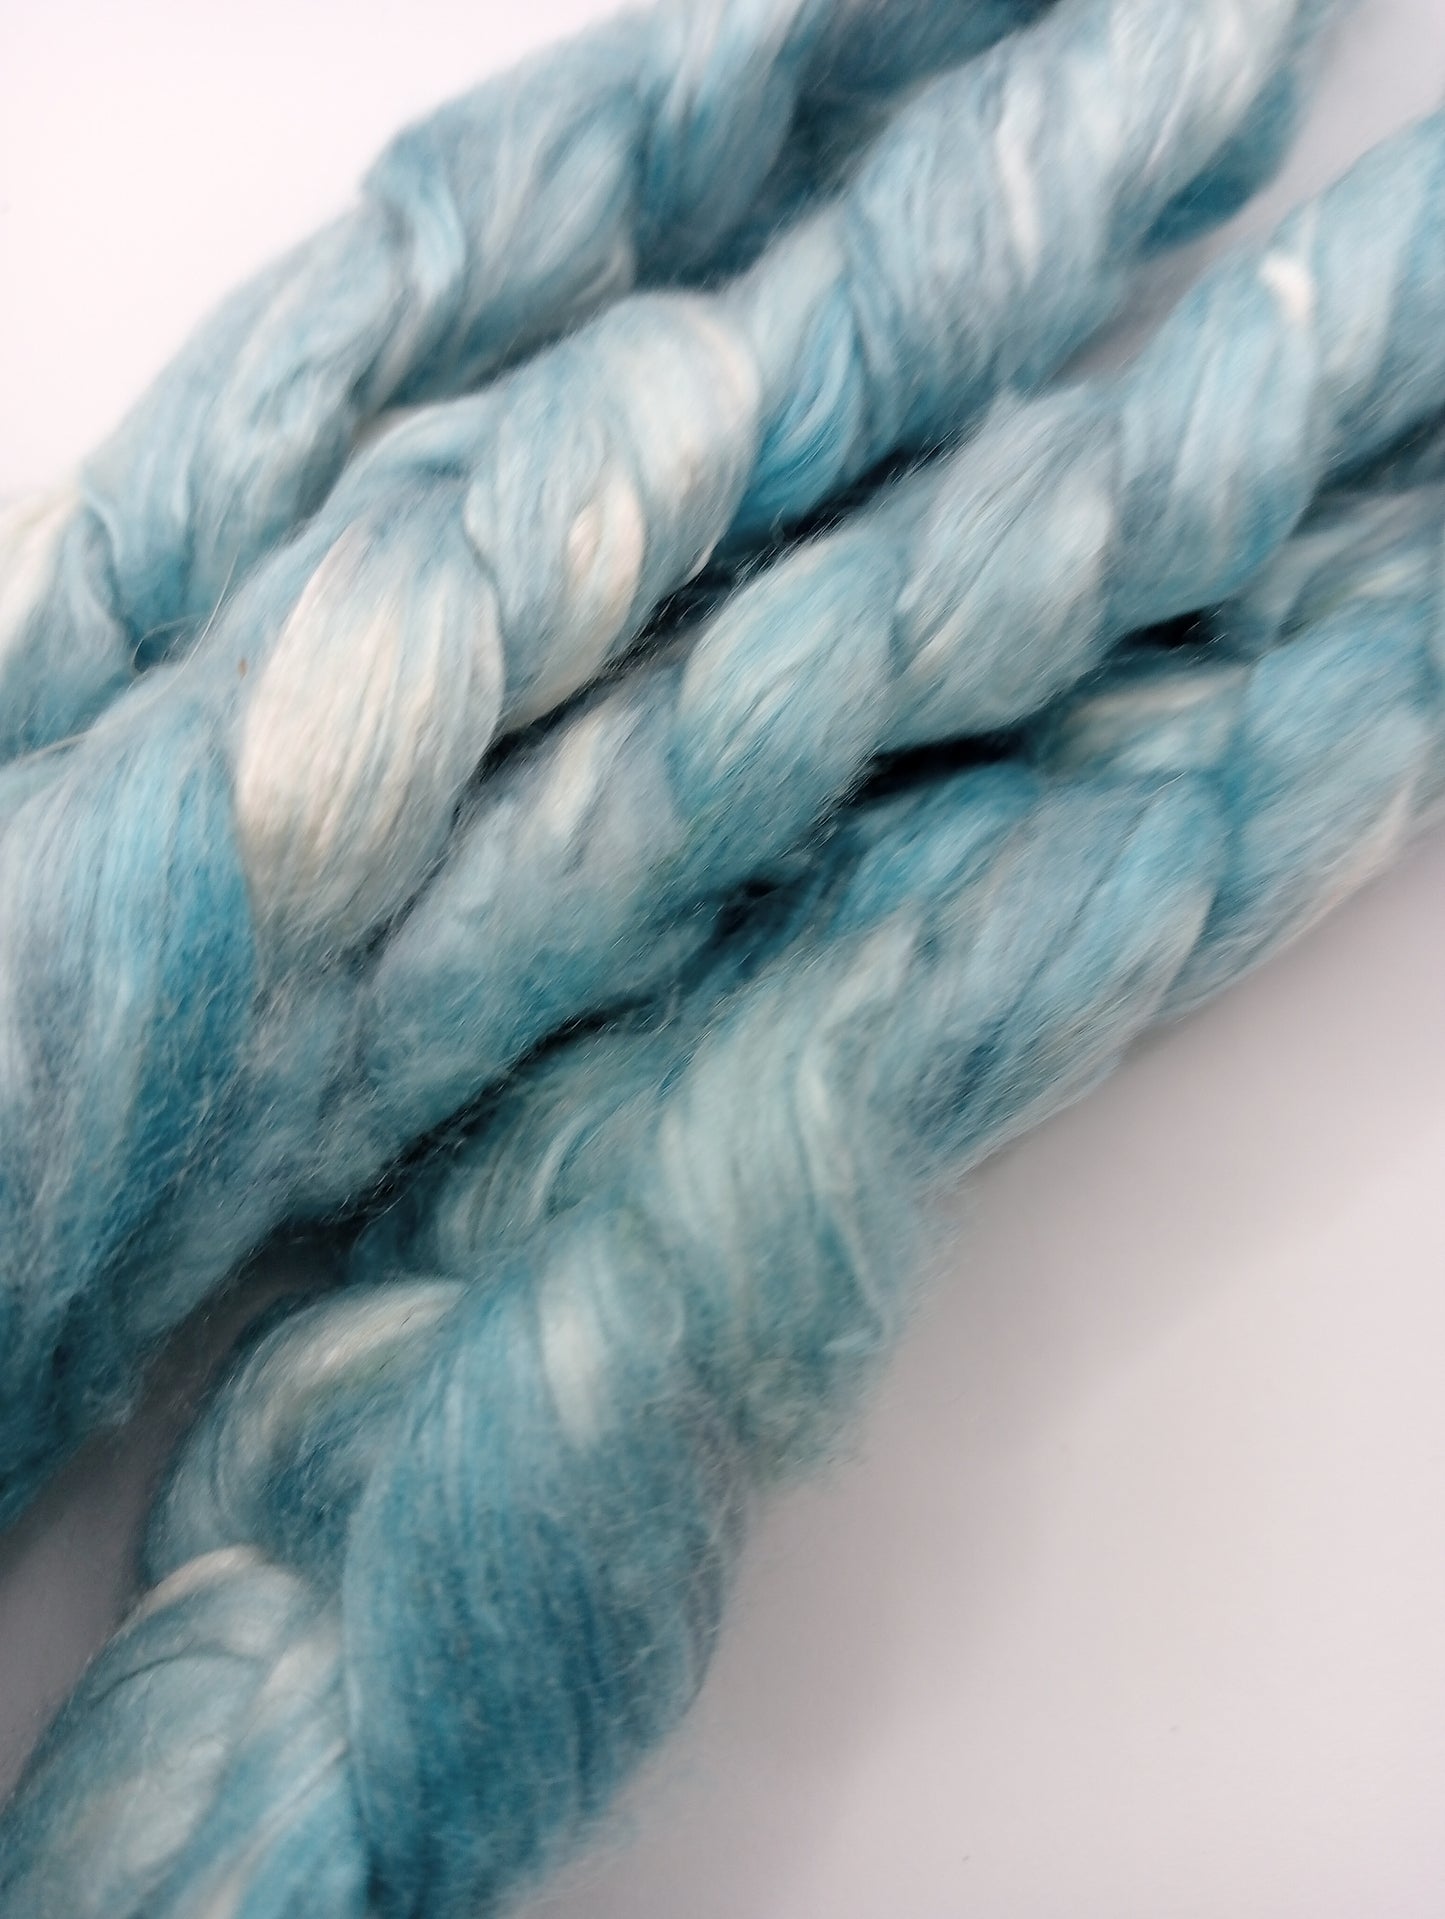 50G 'A' Grade Pure Mulberry Silk- "Pale blues" Hand Dyed Luxury